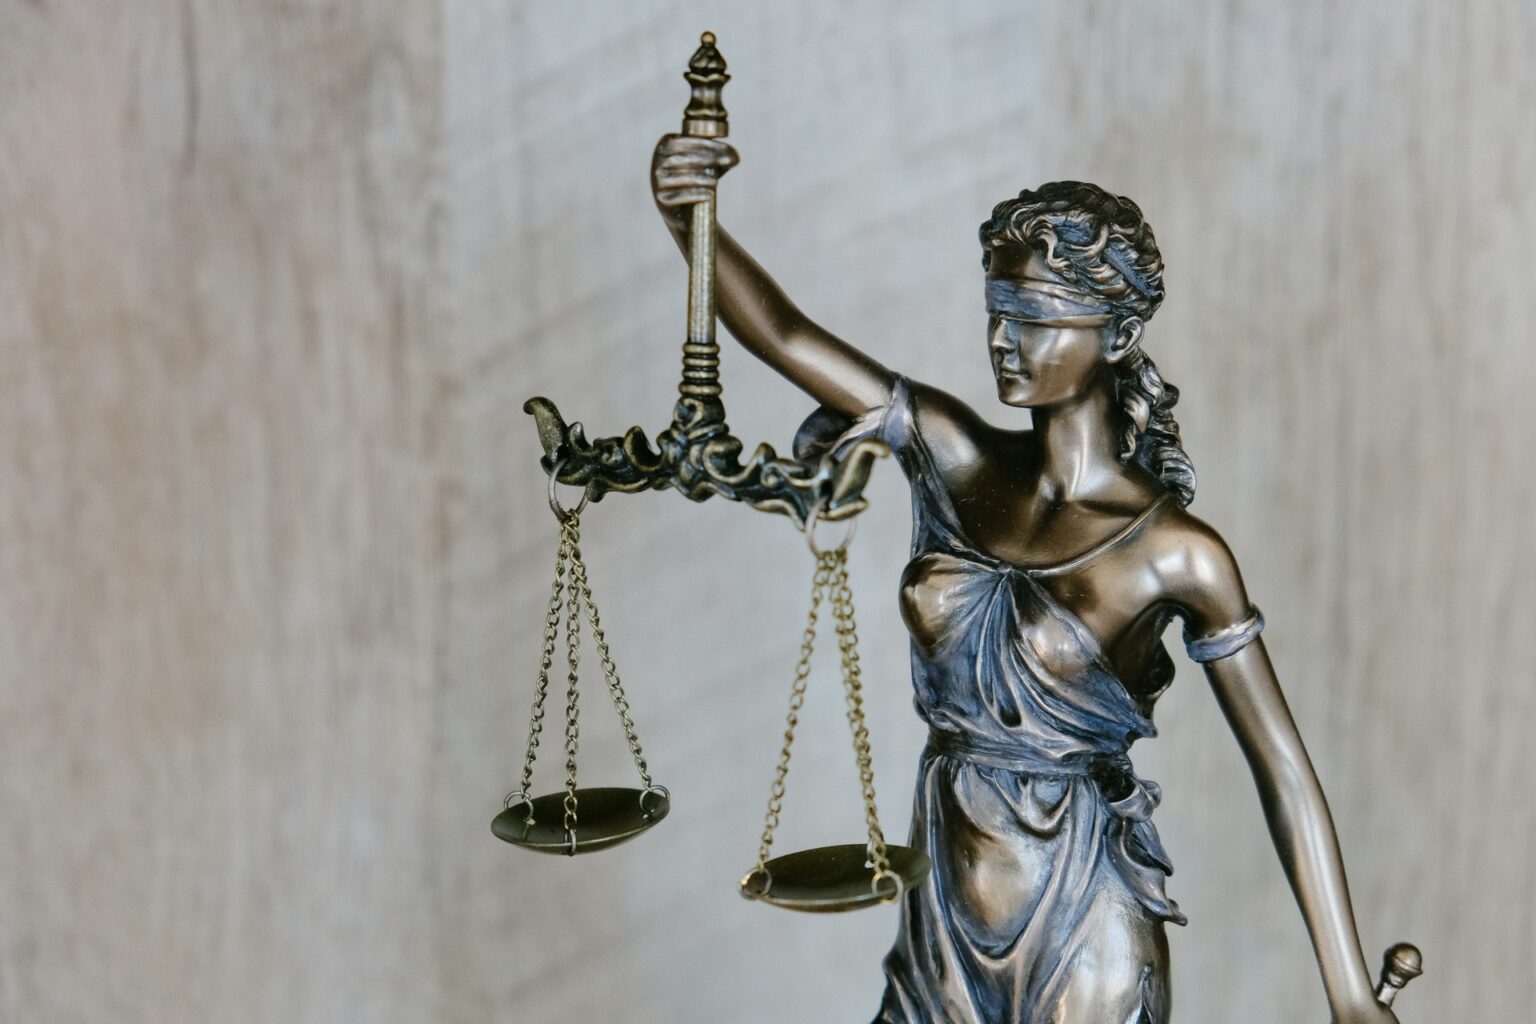 Image of "lady justice"